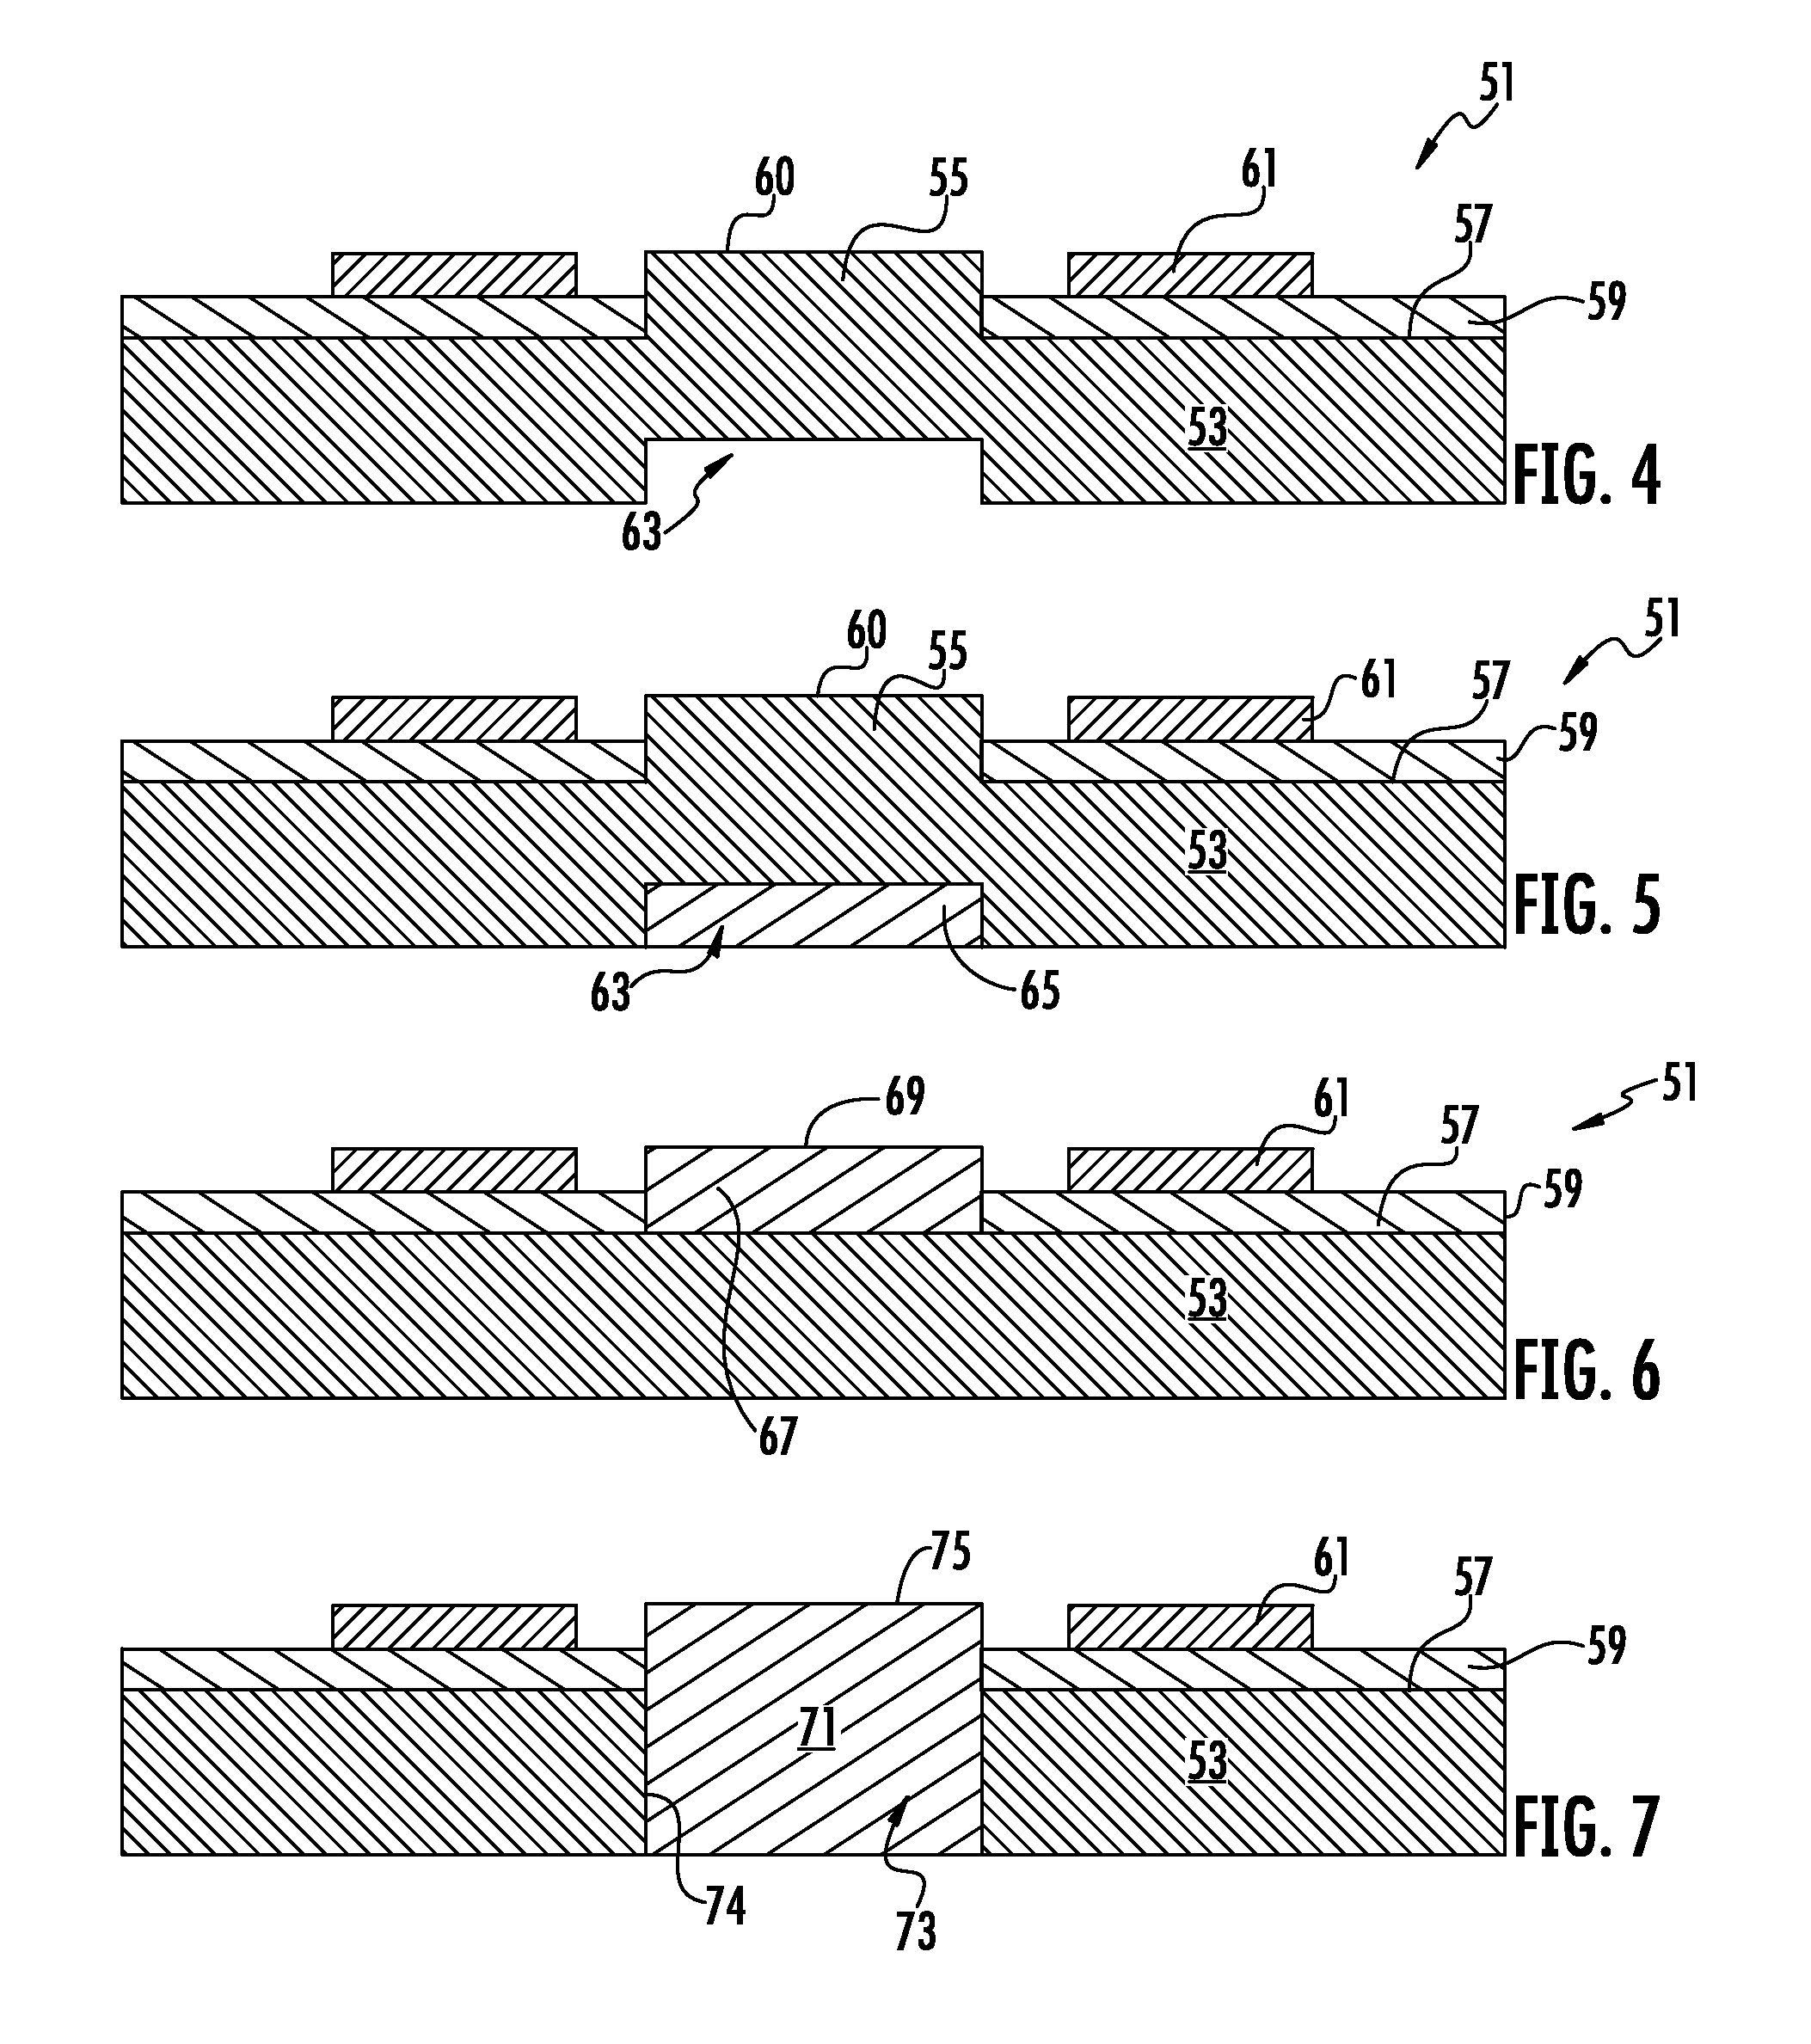 Circuit board with thermo-conductive pillar